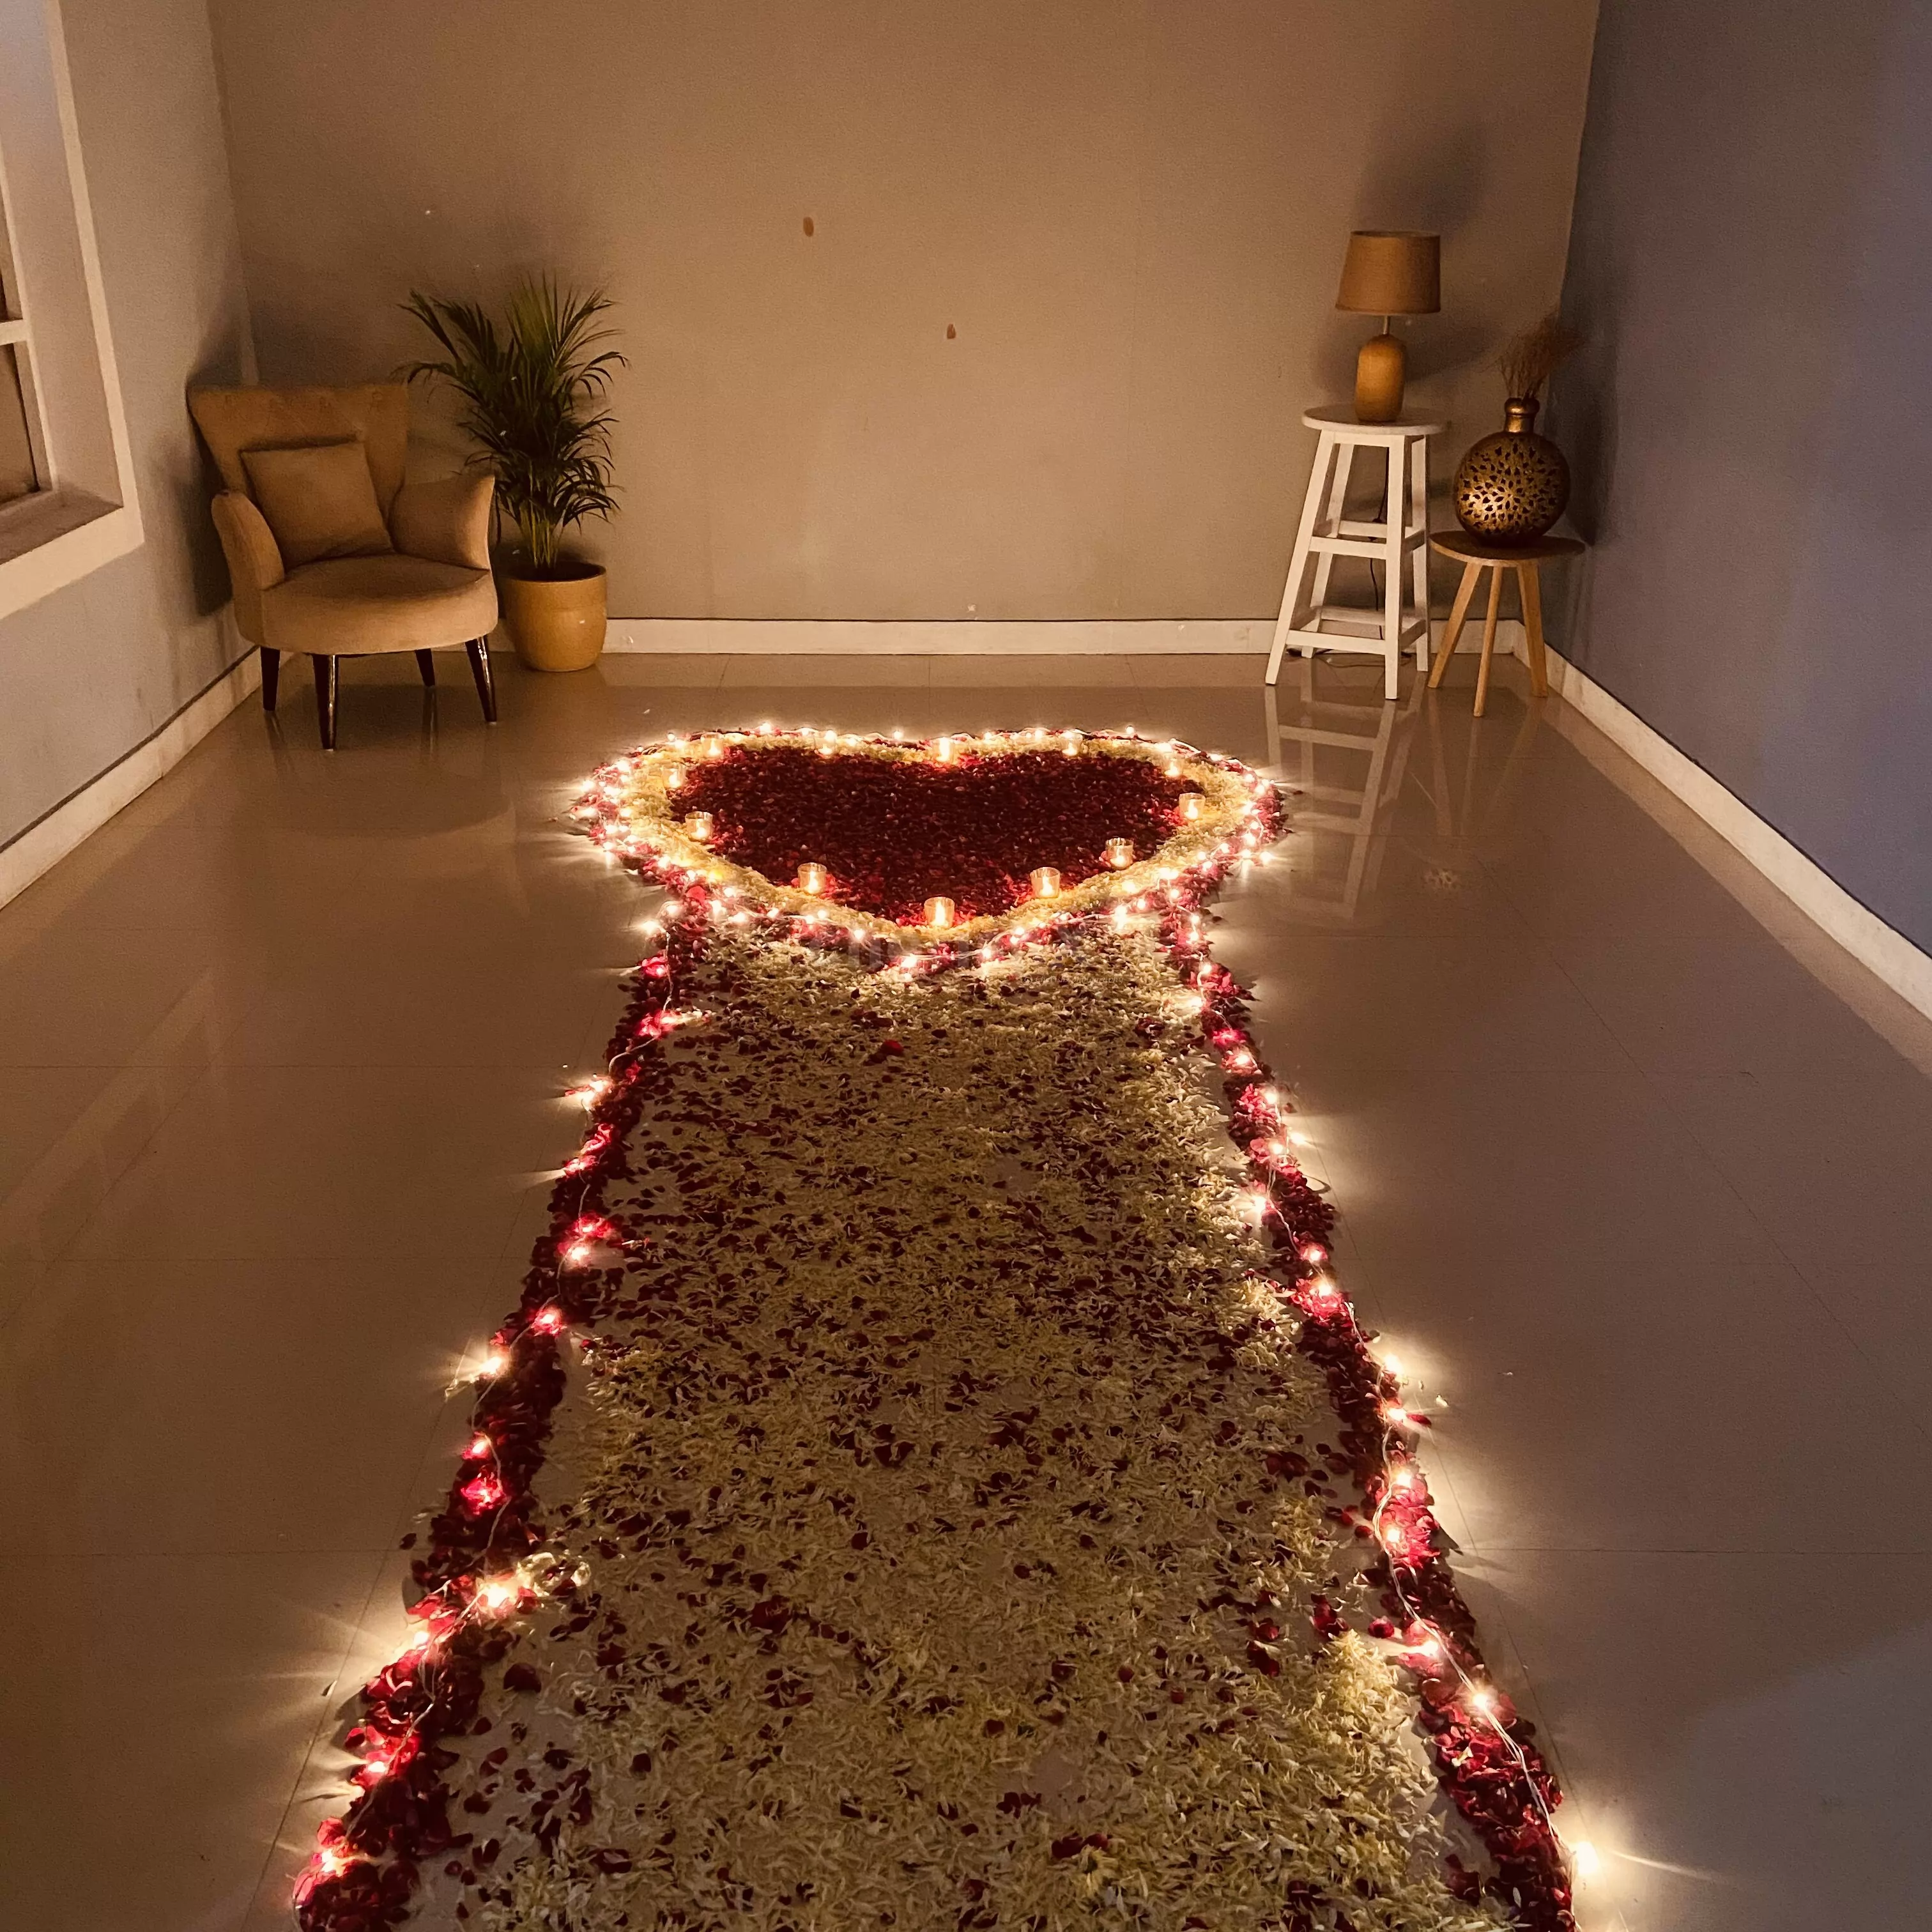 Proposal Setting with Flowers & Candles Pathway at home in Delhi ...